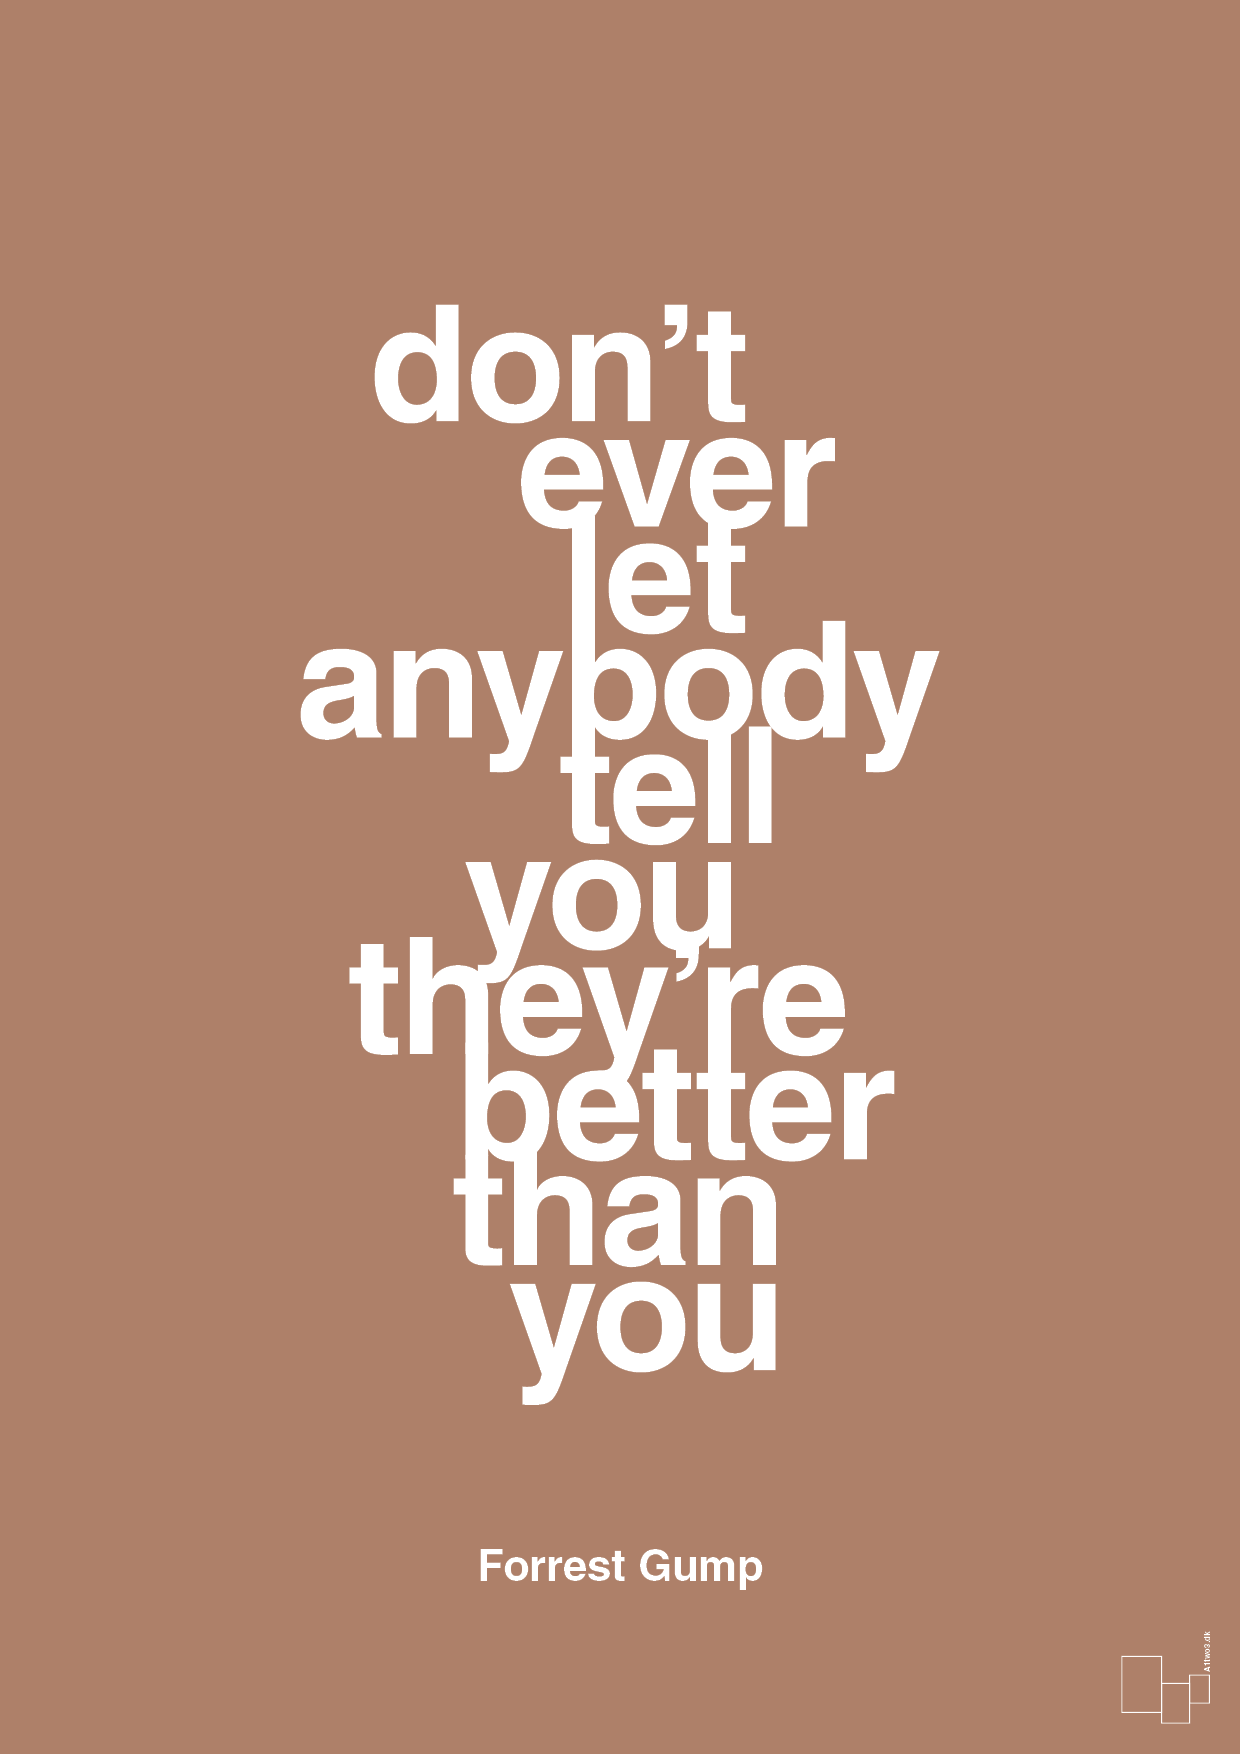 don’t ever let anybody tell you they’re better than you - Plakat med Citater i Cider Spice